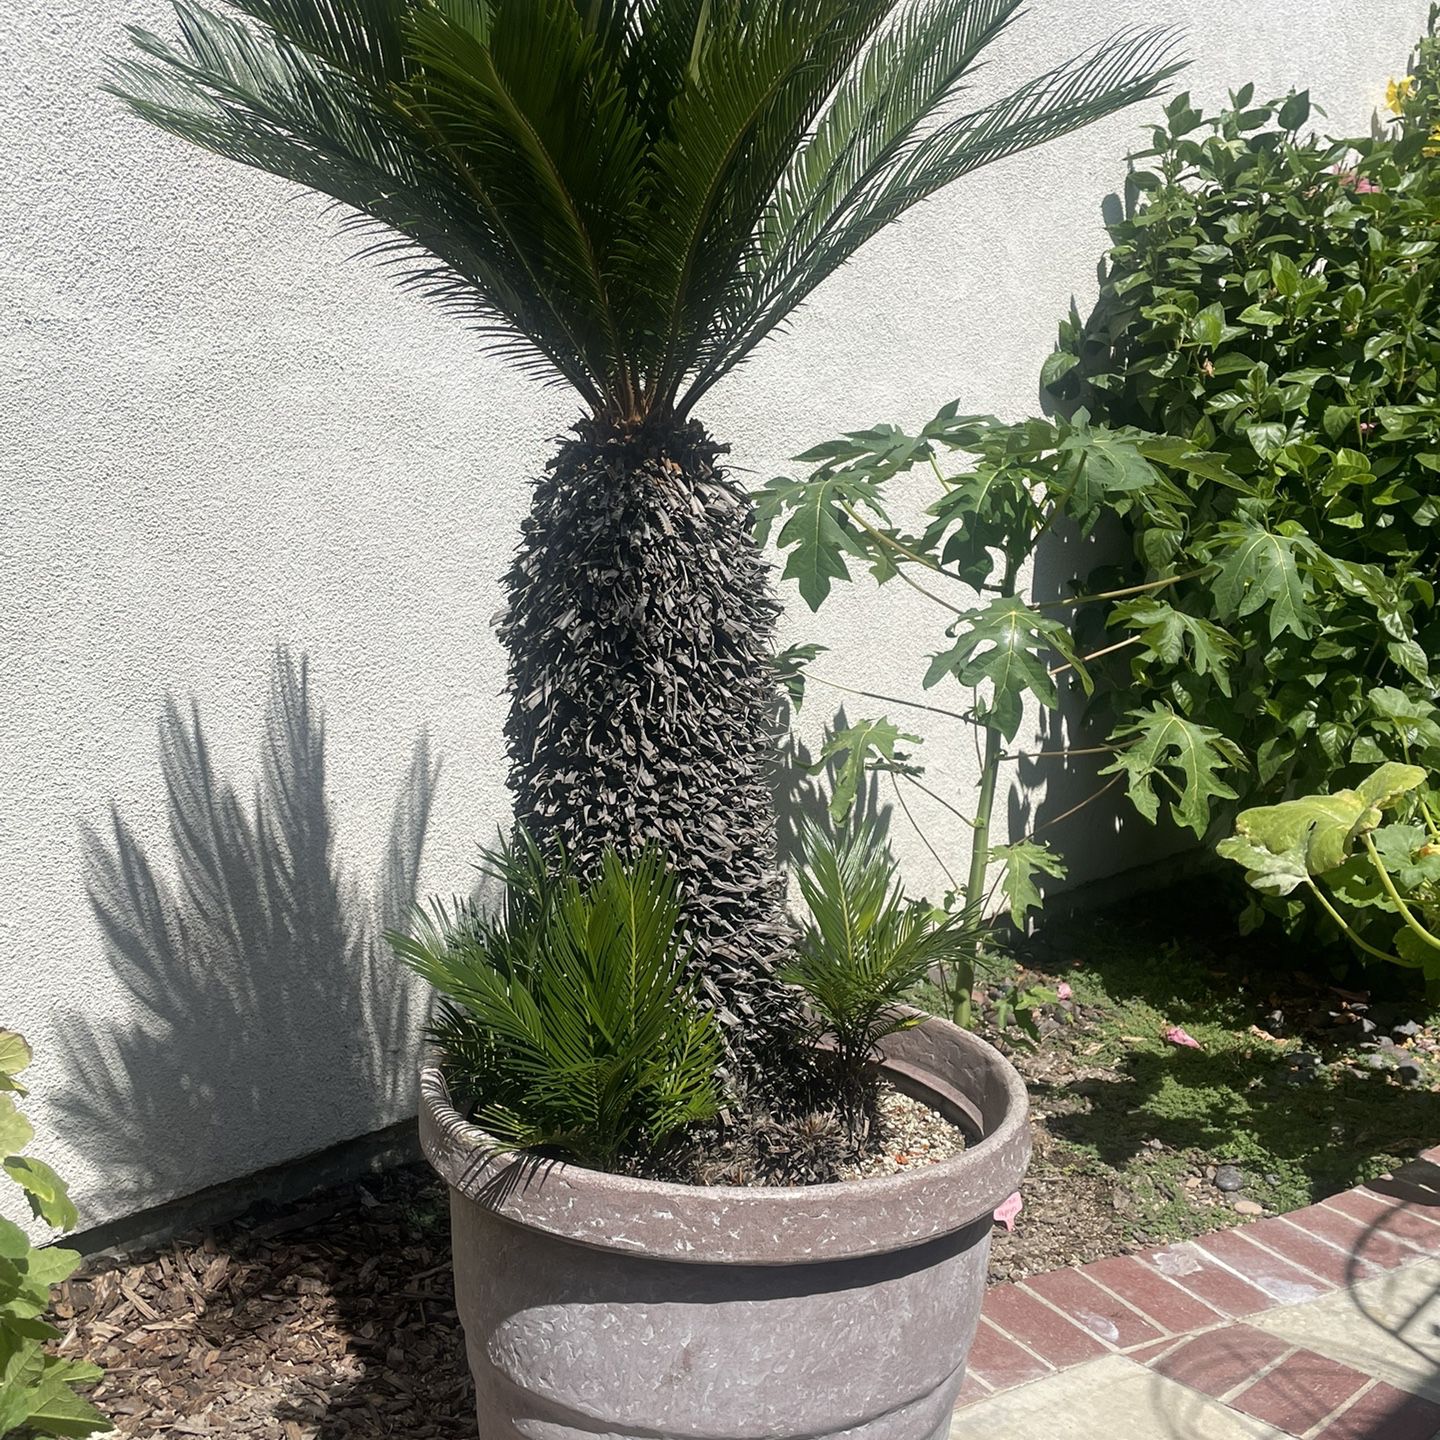 2 Large, Healthy Sago Palms For Sale